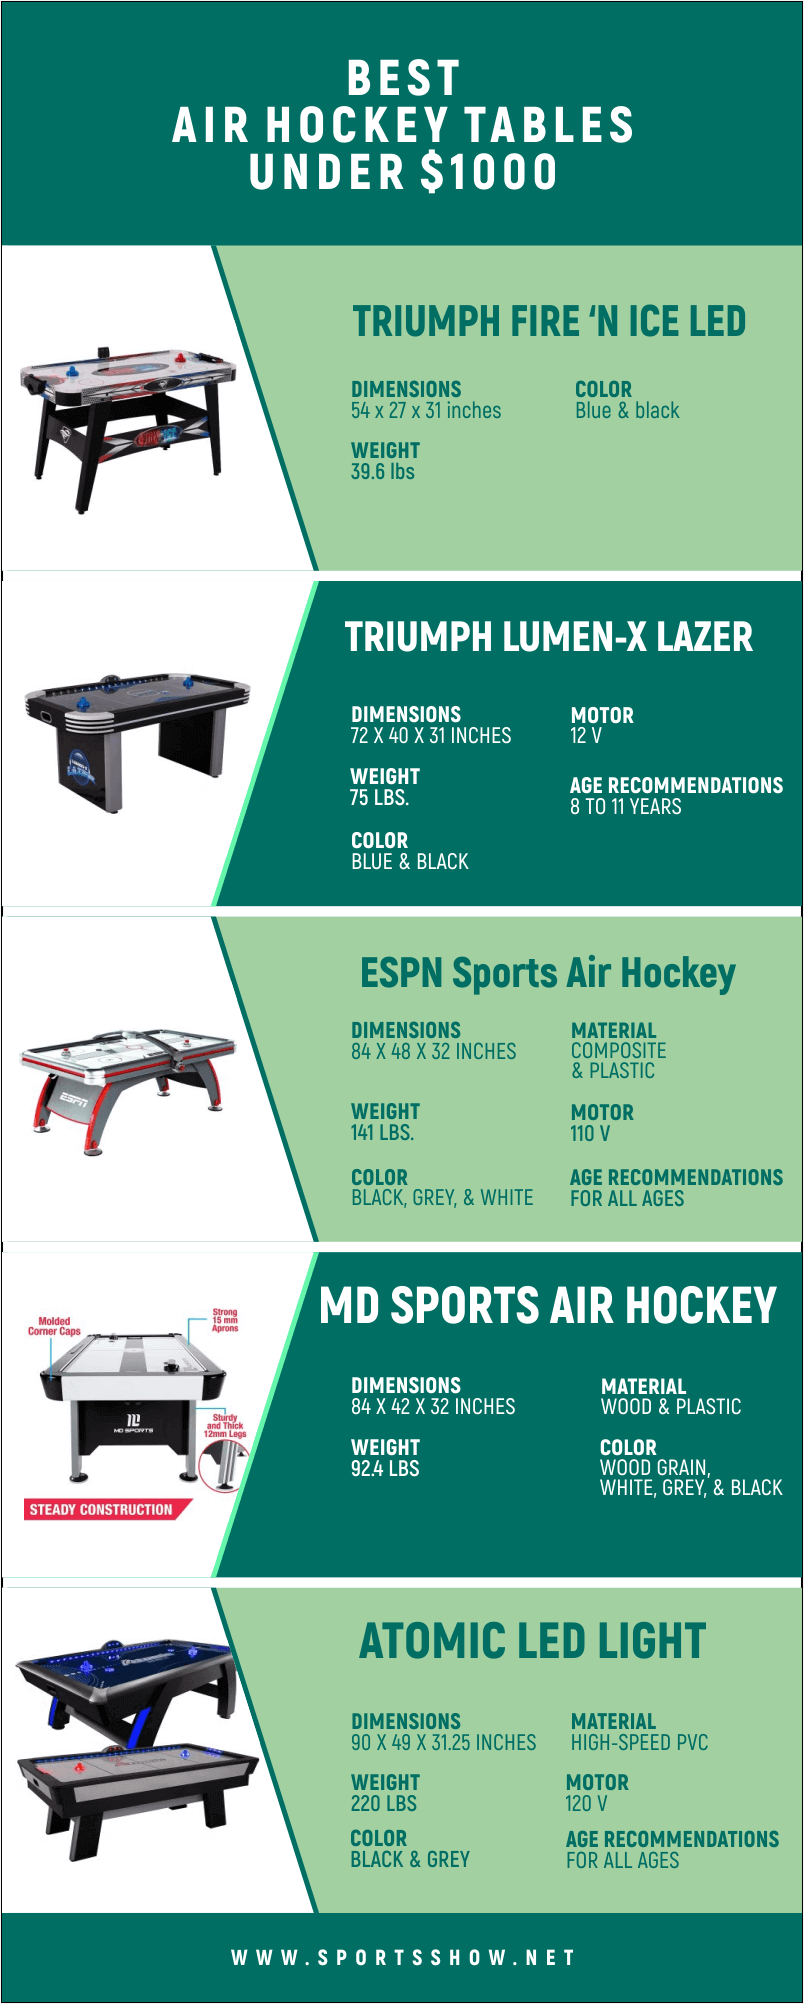 Best Air Hockey Tables Under $1000 - Infographic